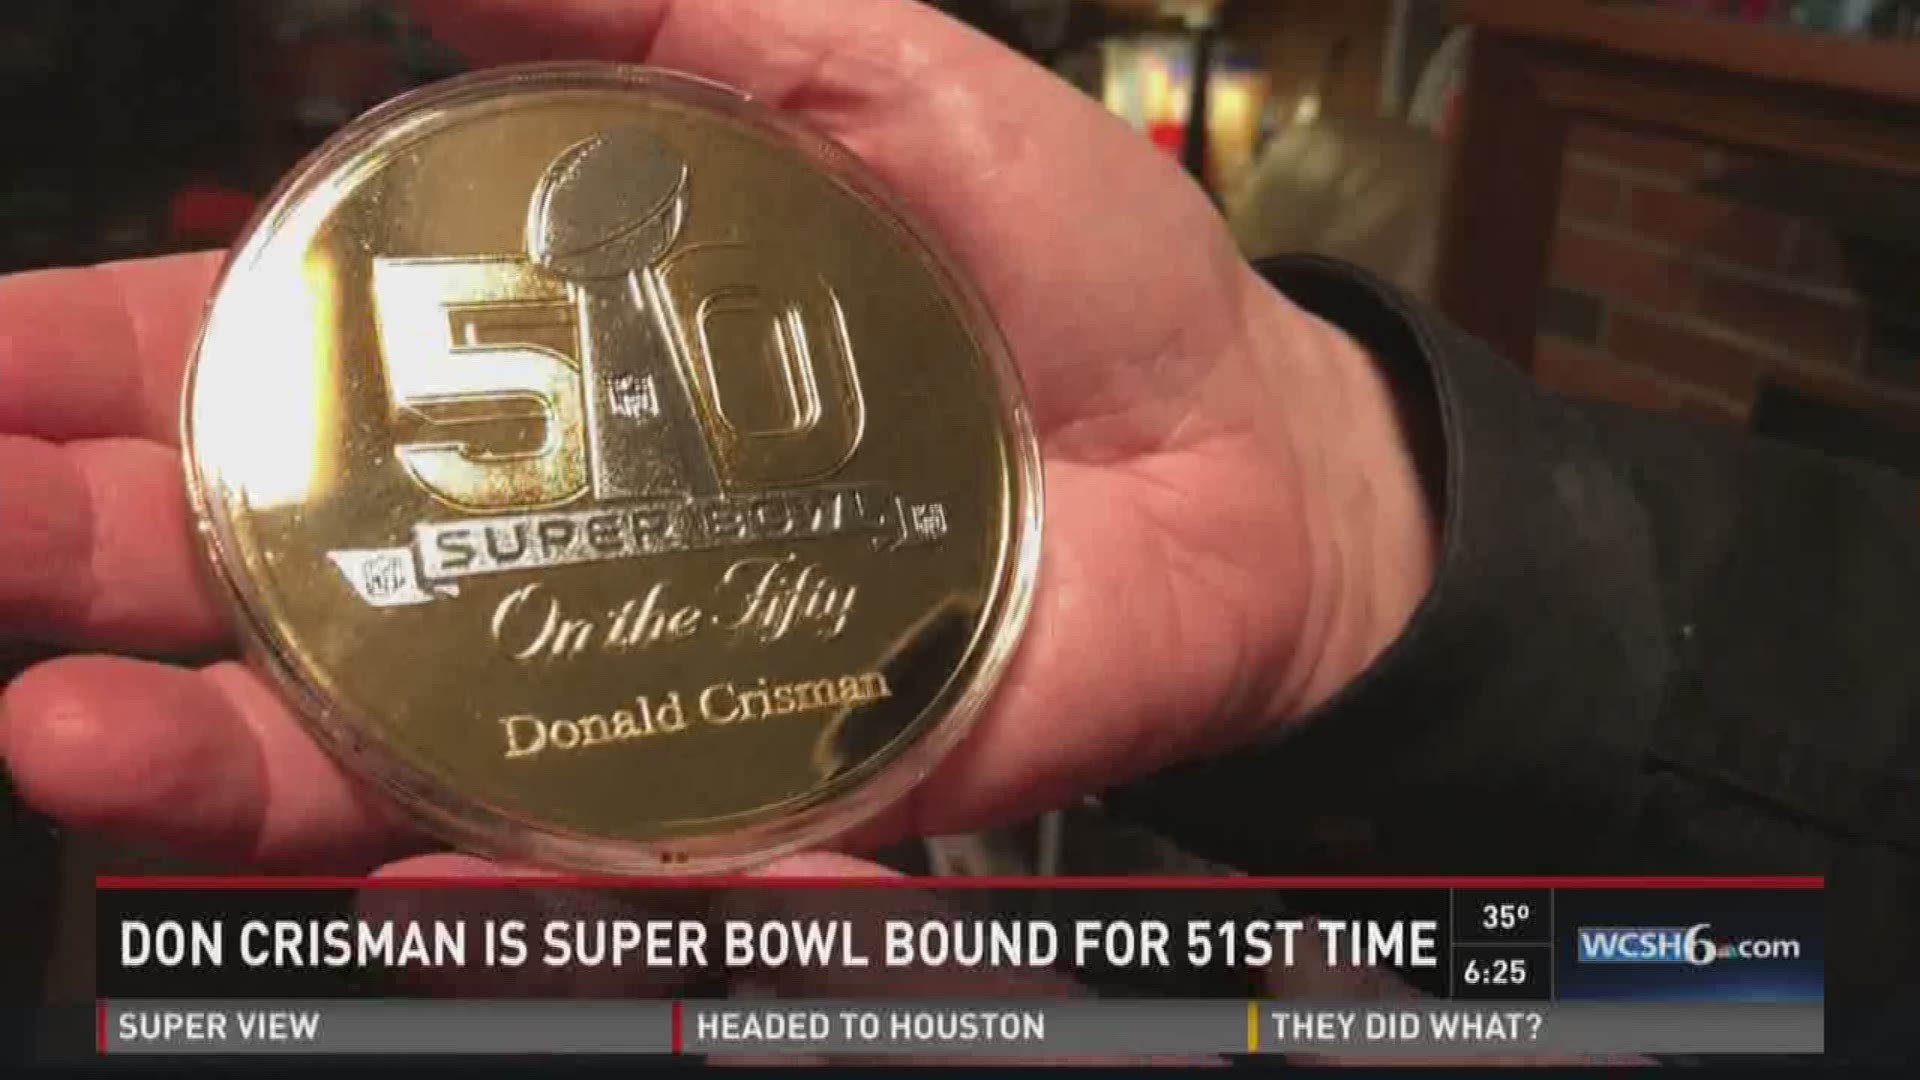 Don Crisman is Super Bowl bound for 51st time